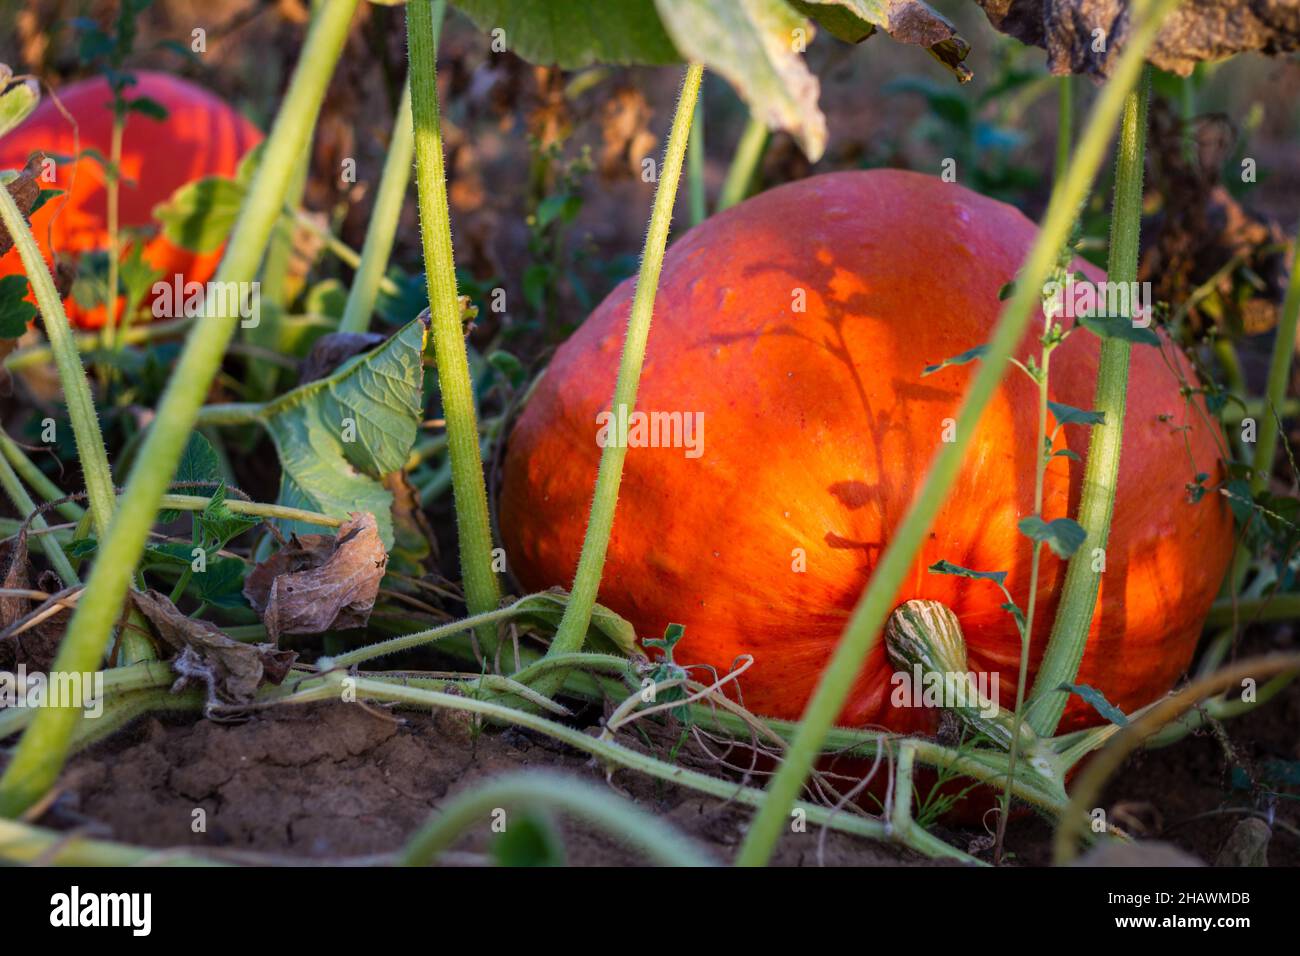 Pumpkin at agricultural field is ready for harvest. Big orange pumpkins growing in vegetable garden at organic farm Stock Photo